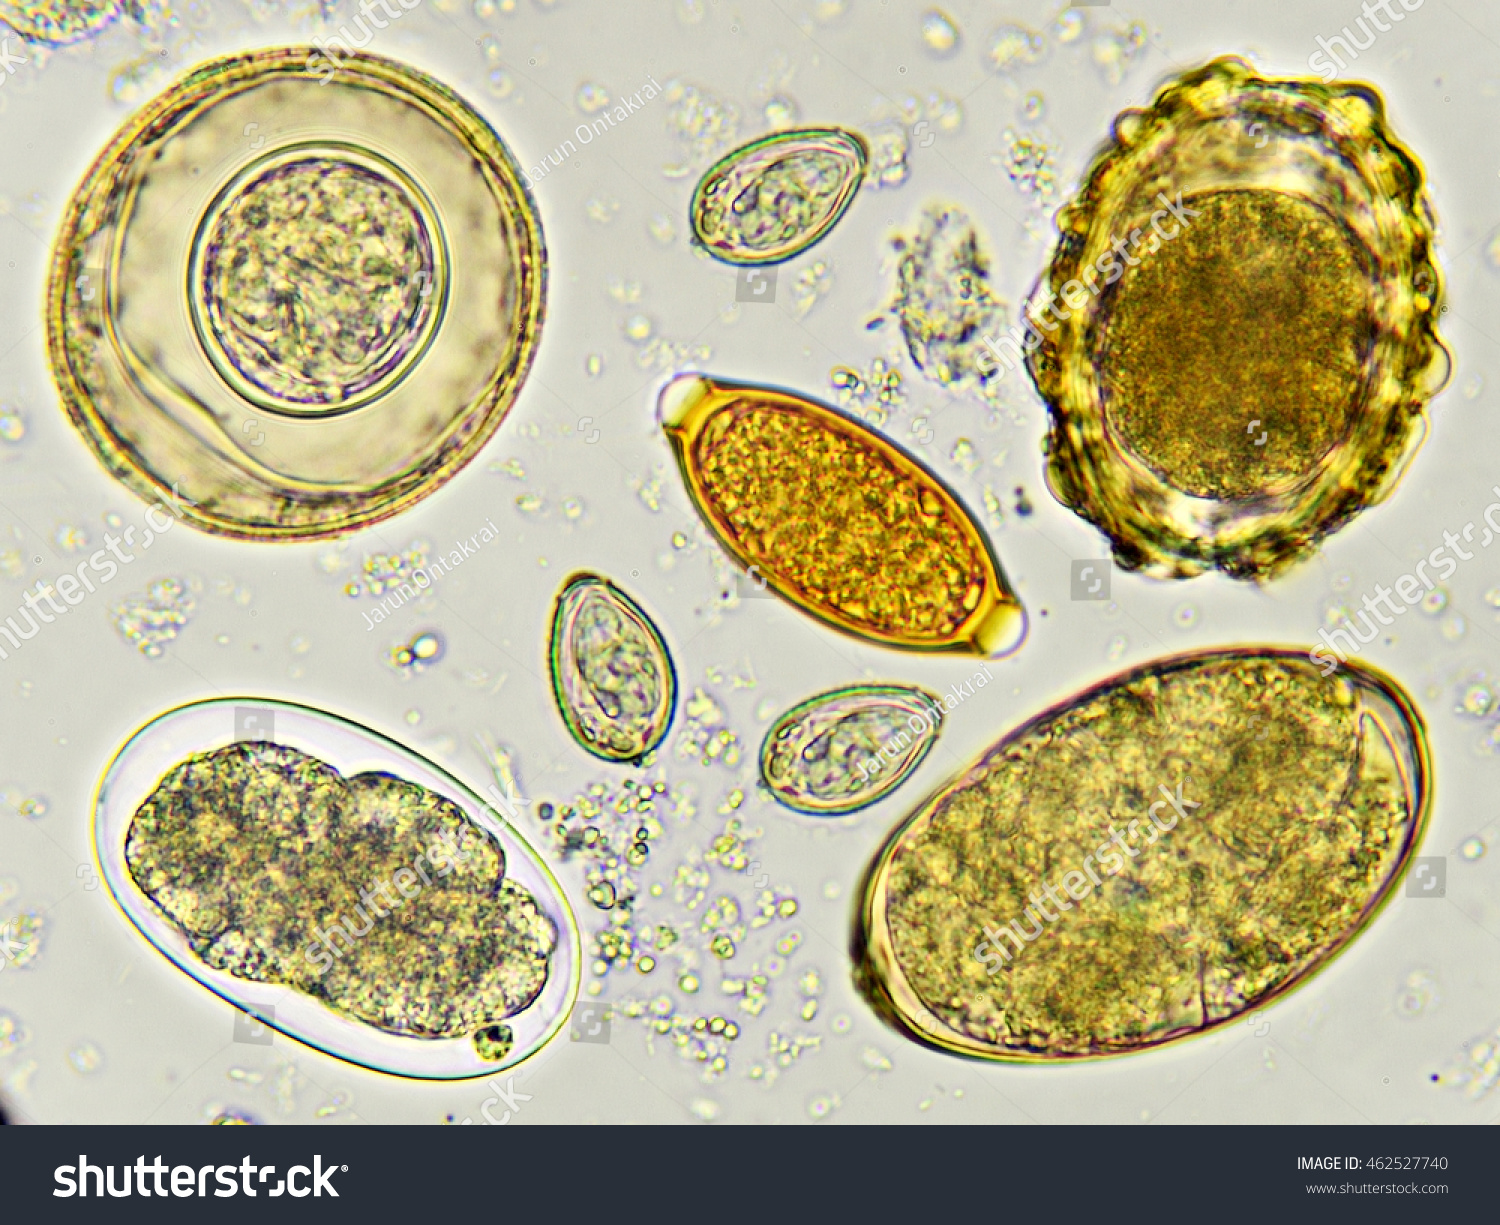 Egg Of Helminth In Stool, Analyze By Microscope Stock Photo 462527740 ...